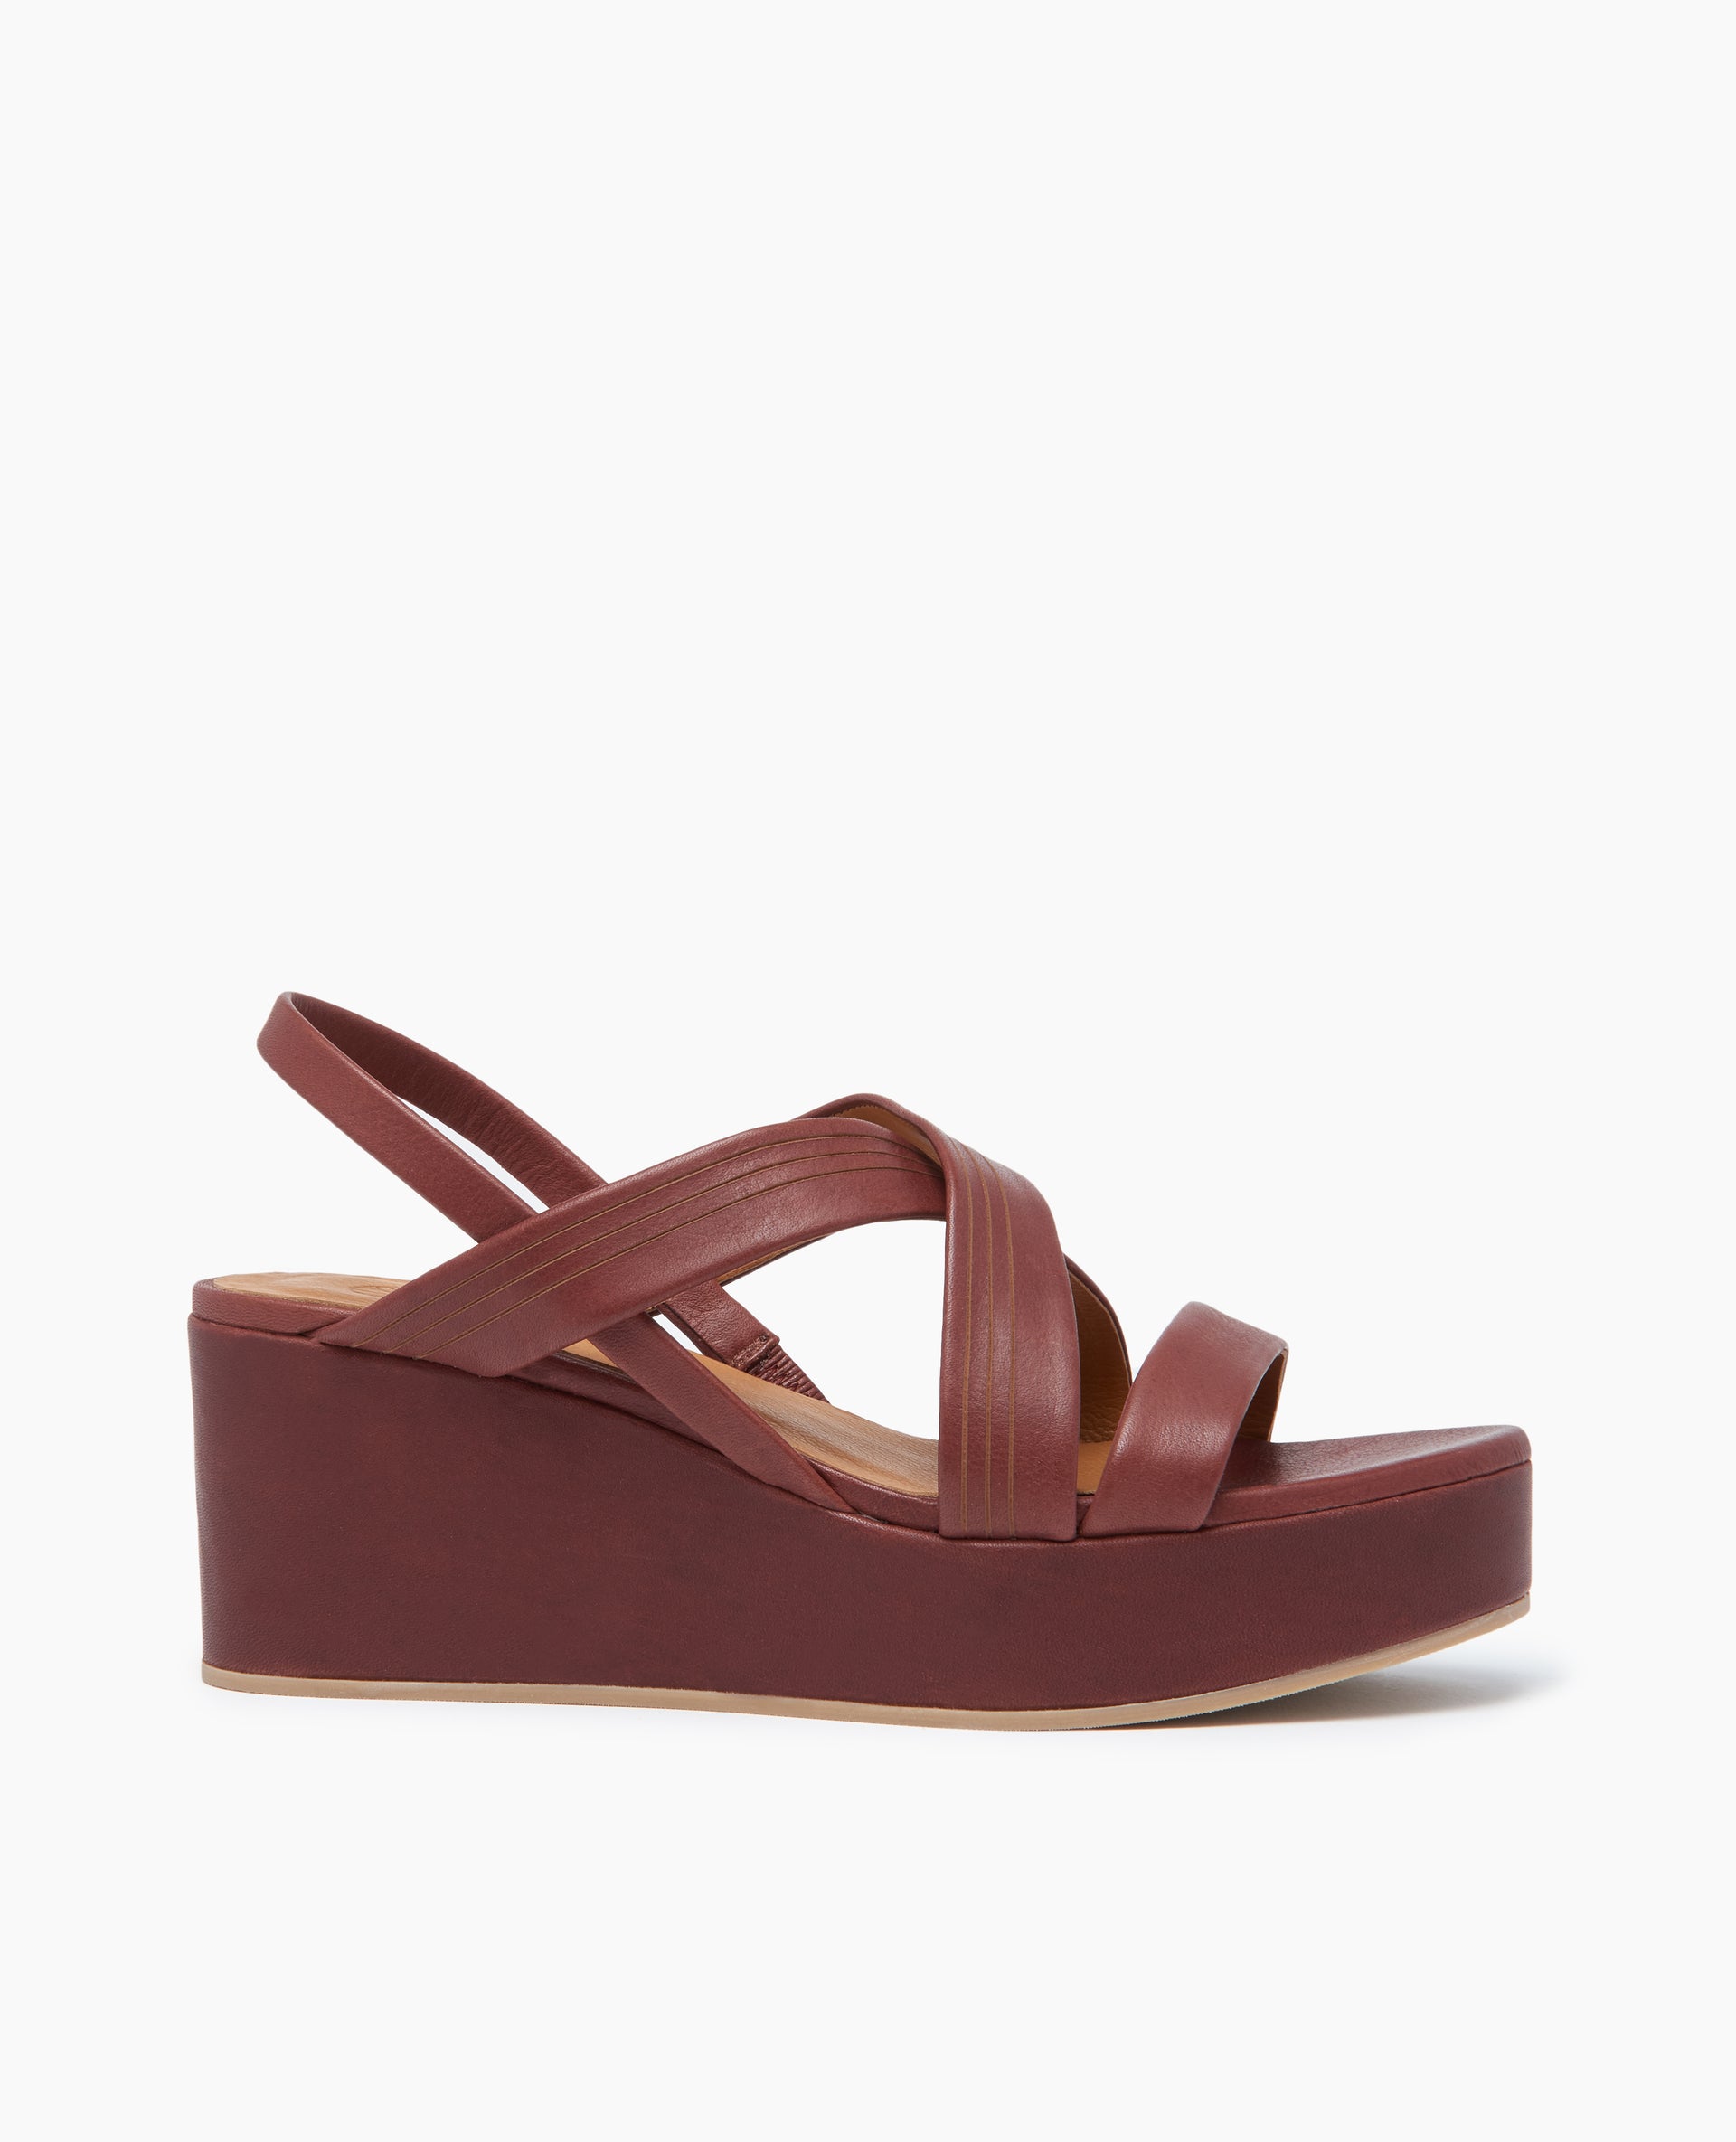 Wedges | Coclico